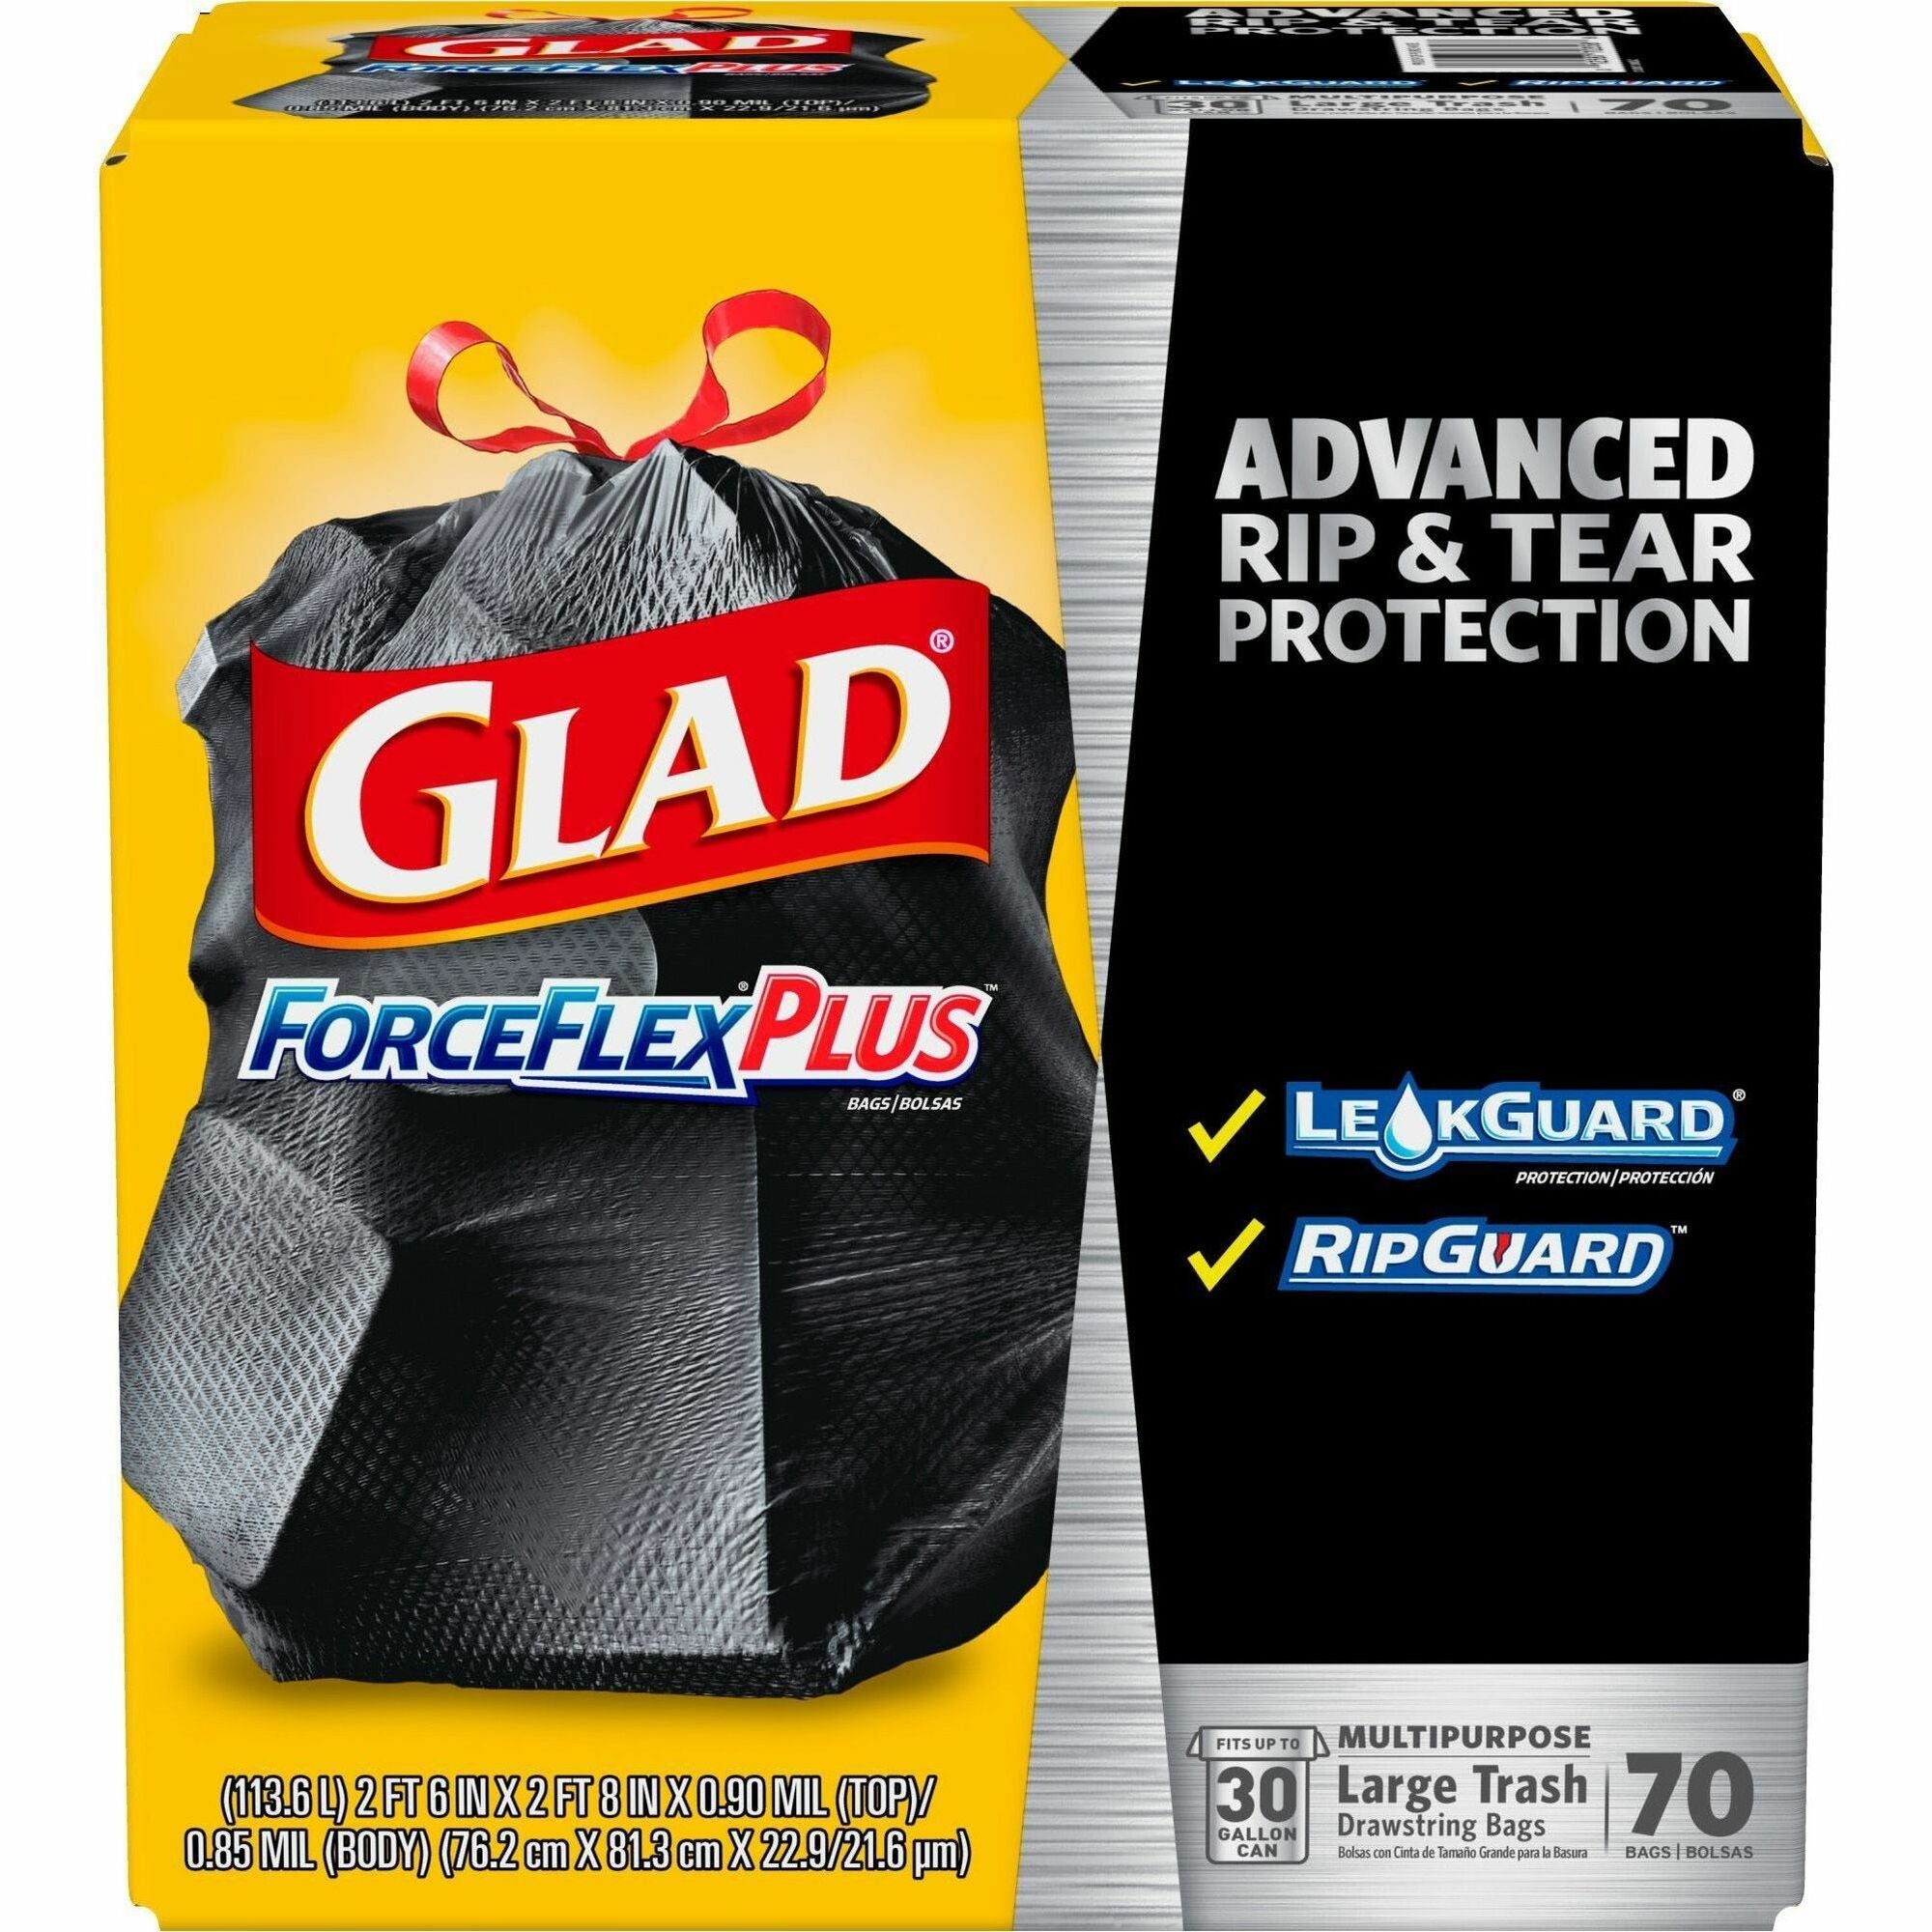 Glad Large Drawstring Trash Bags - ForceFlexPlus - 30 gal Capacity - 1.05 mil (27 Micron) Thickness - Drawstring Closure - Black - 4900/Bundle - 70 Per Box - Kitchen, Outdoor, Commercial, Office - 1